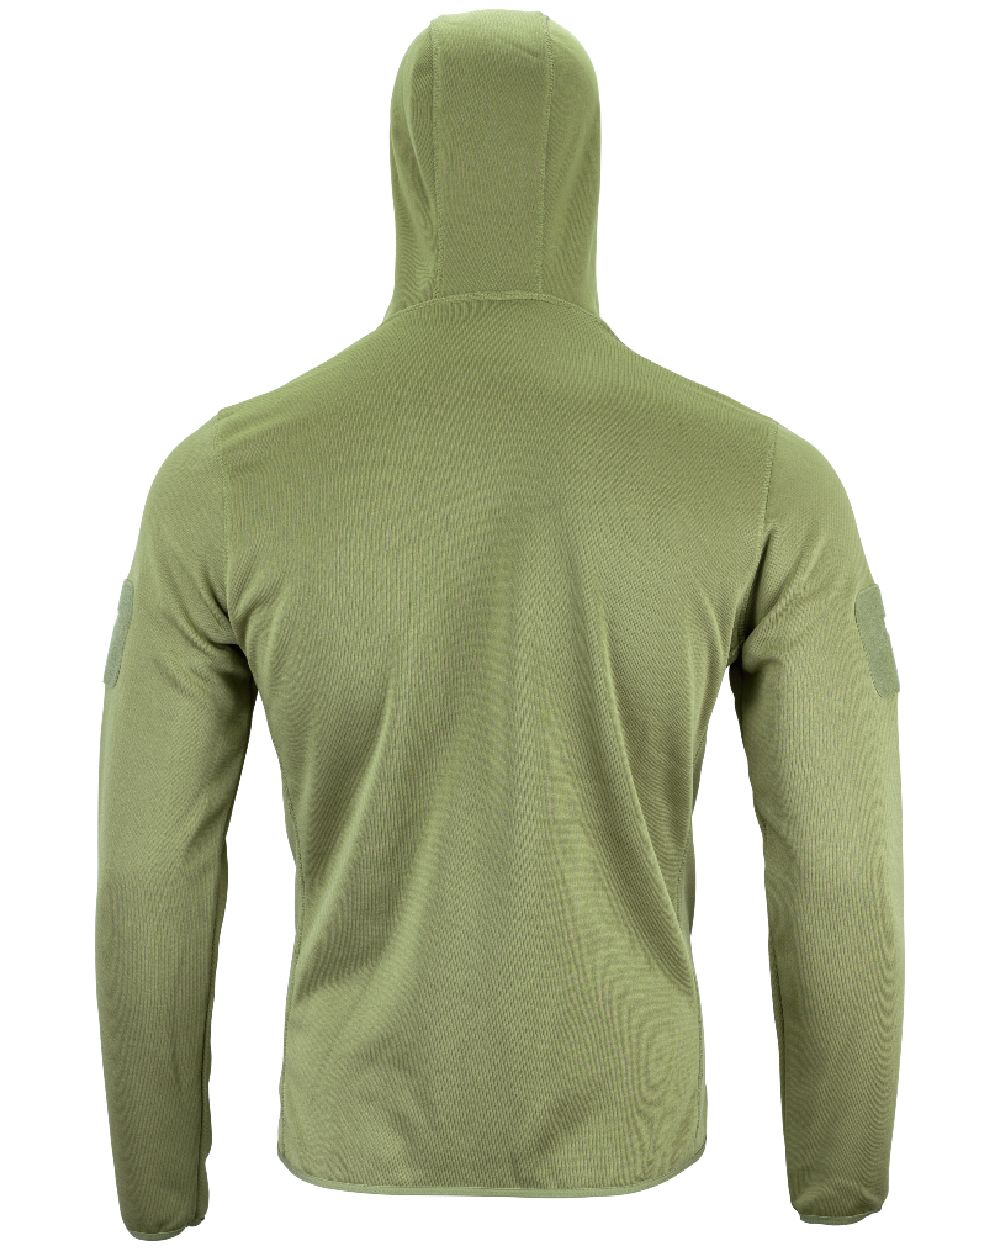 Viper Armour Hoodie in Green 